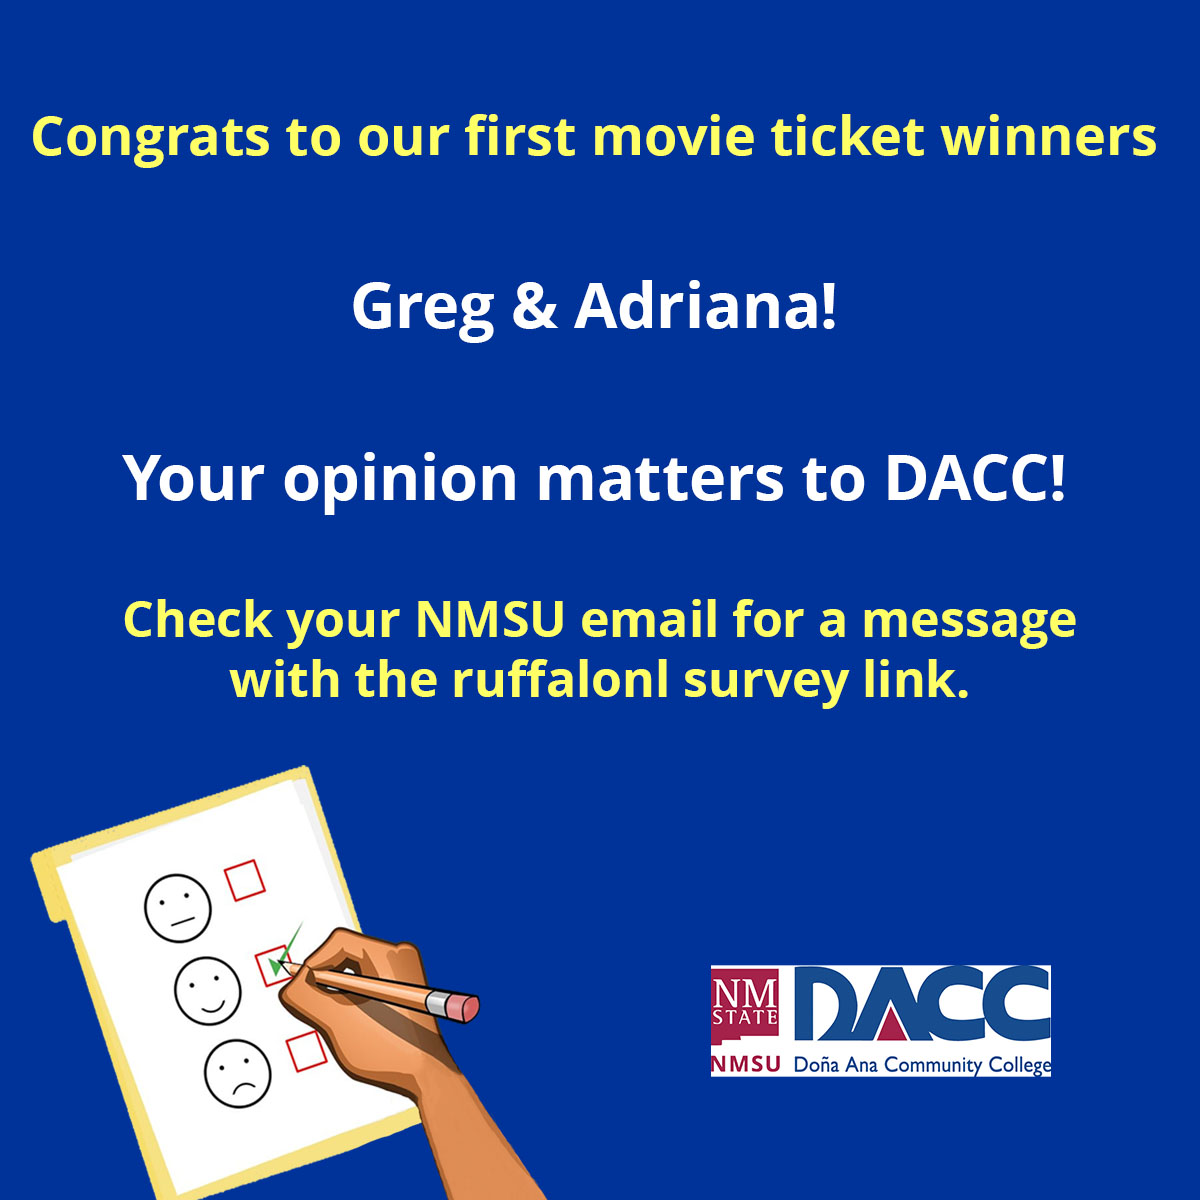 More movie ticket winners – Greg & Adriana! Only two more weeks to submit your Student Satisfaction Survey for a chance to win. Check your email for the survey link. Help us improve the student experience! #WeAreDACC